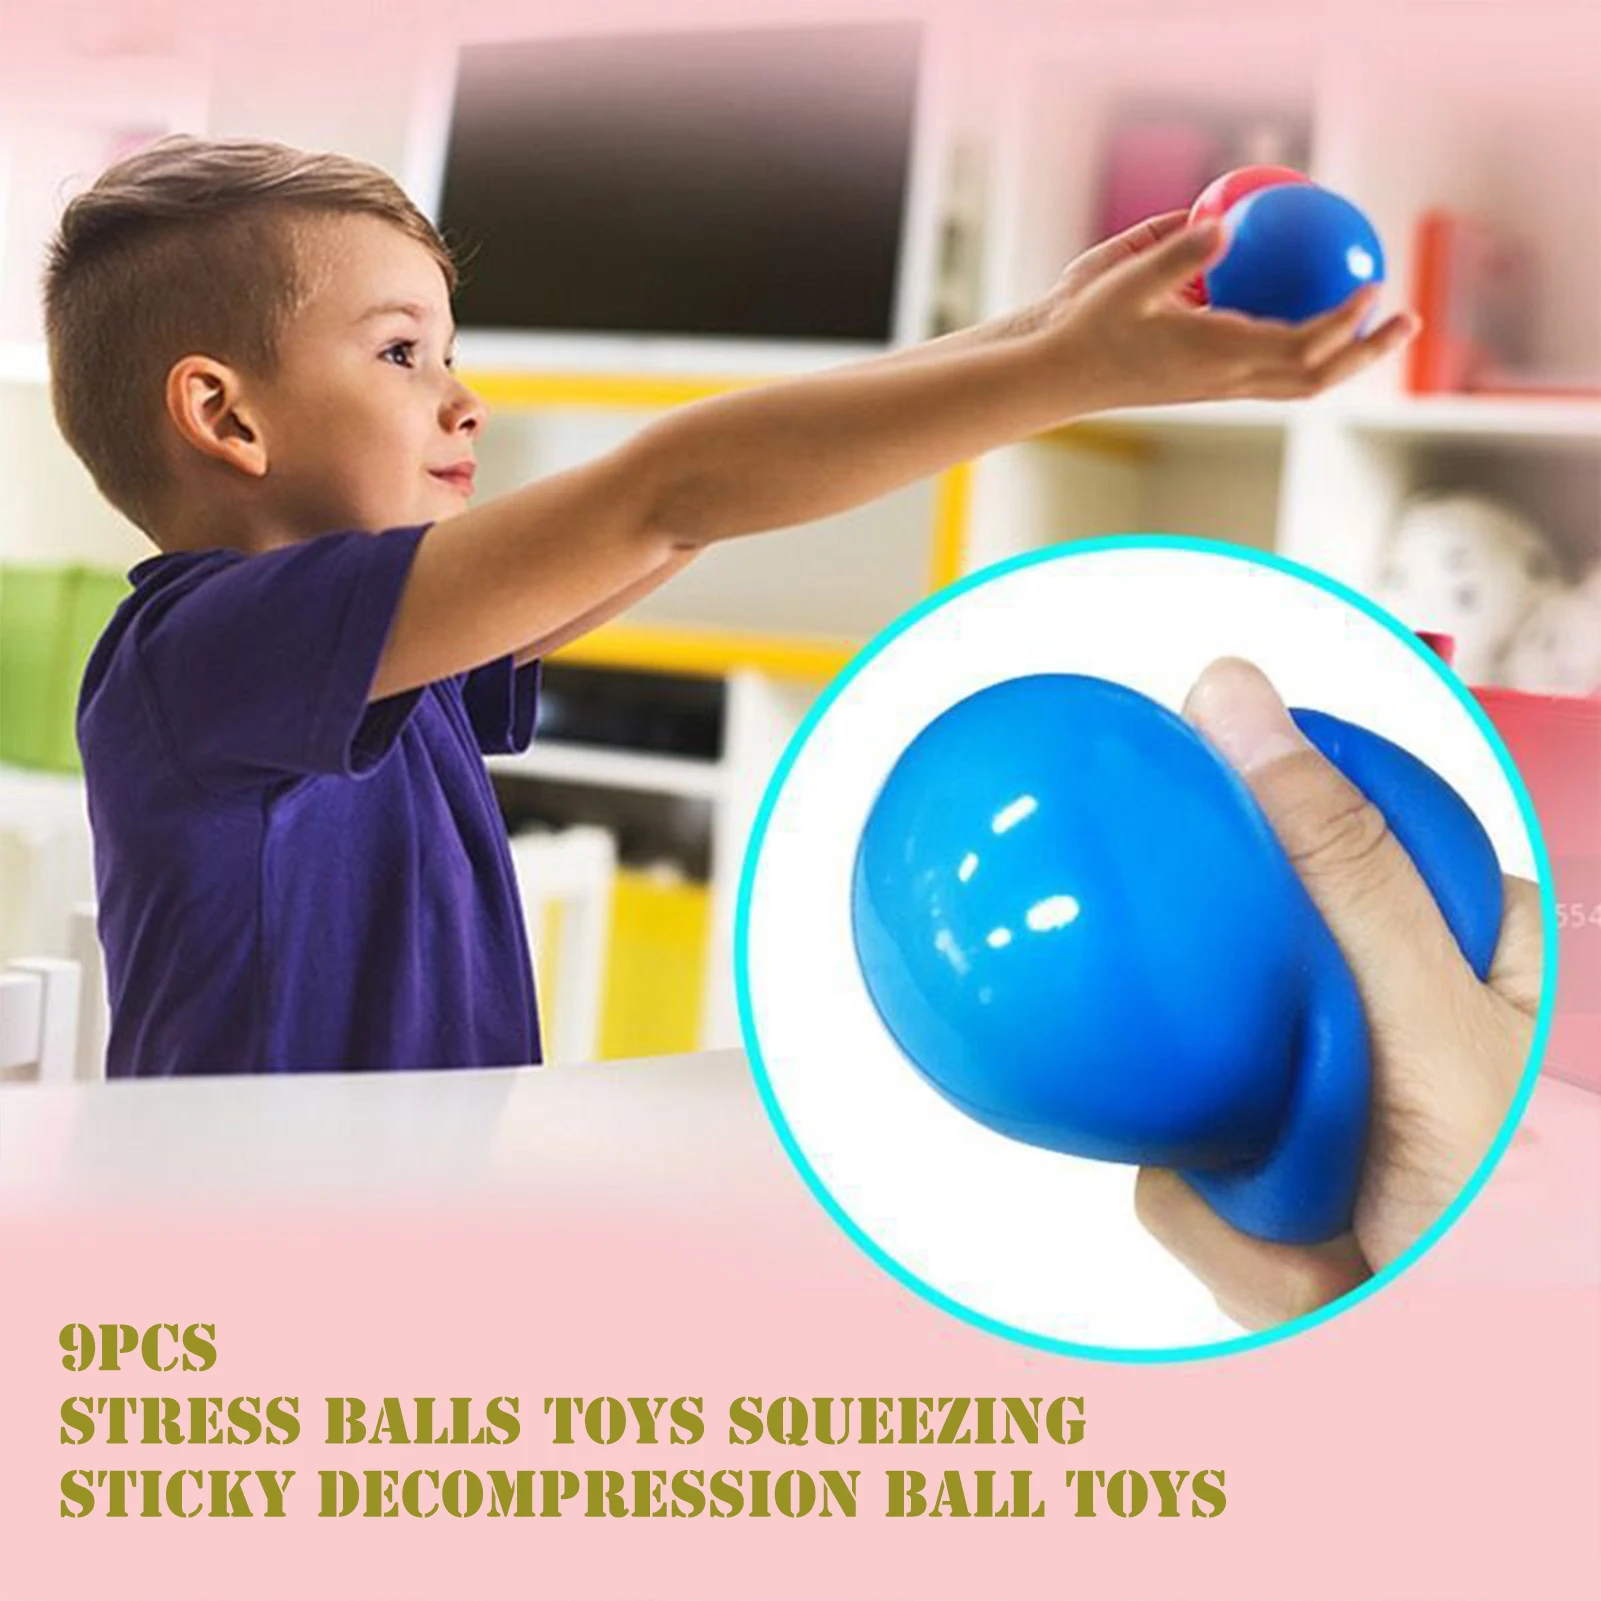 

9pcs Fidget Sensory Toys Stress Balls Toys Squeezing Sticky Decompression Ball Toys Special Need Education Adult Relieve Squisy